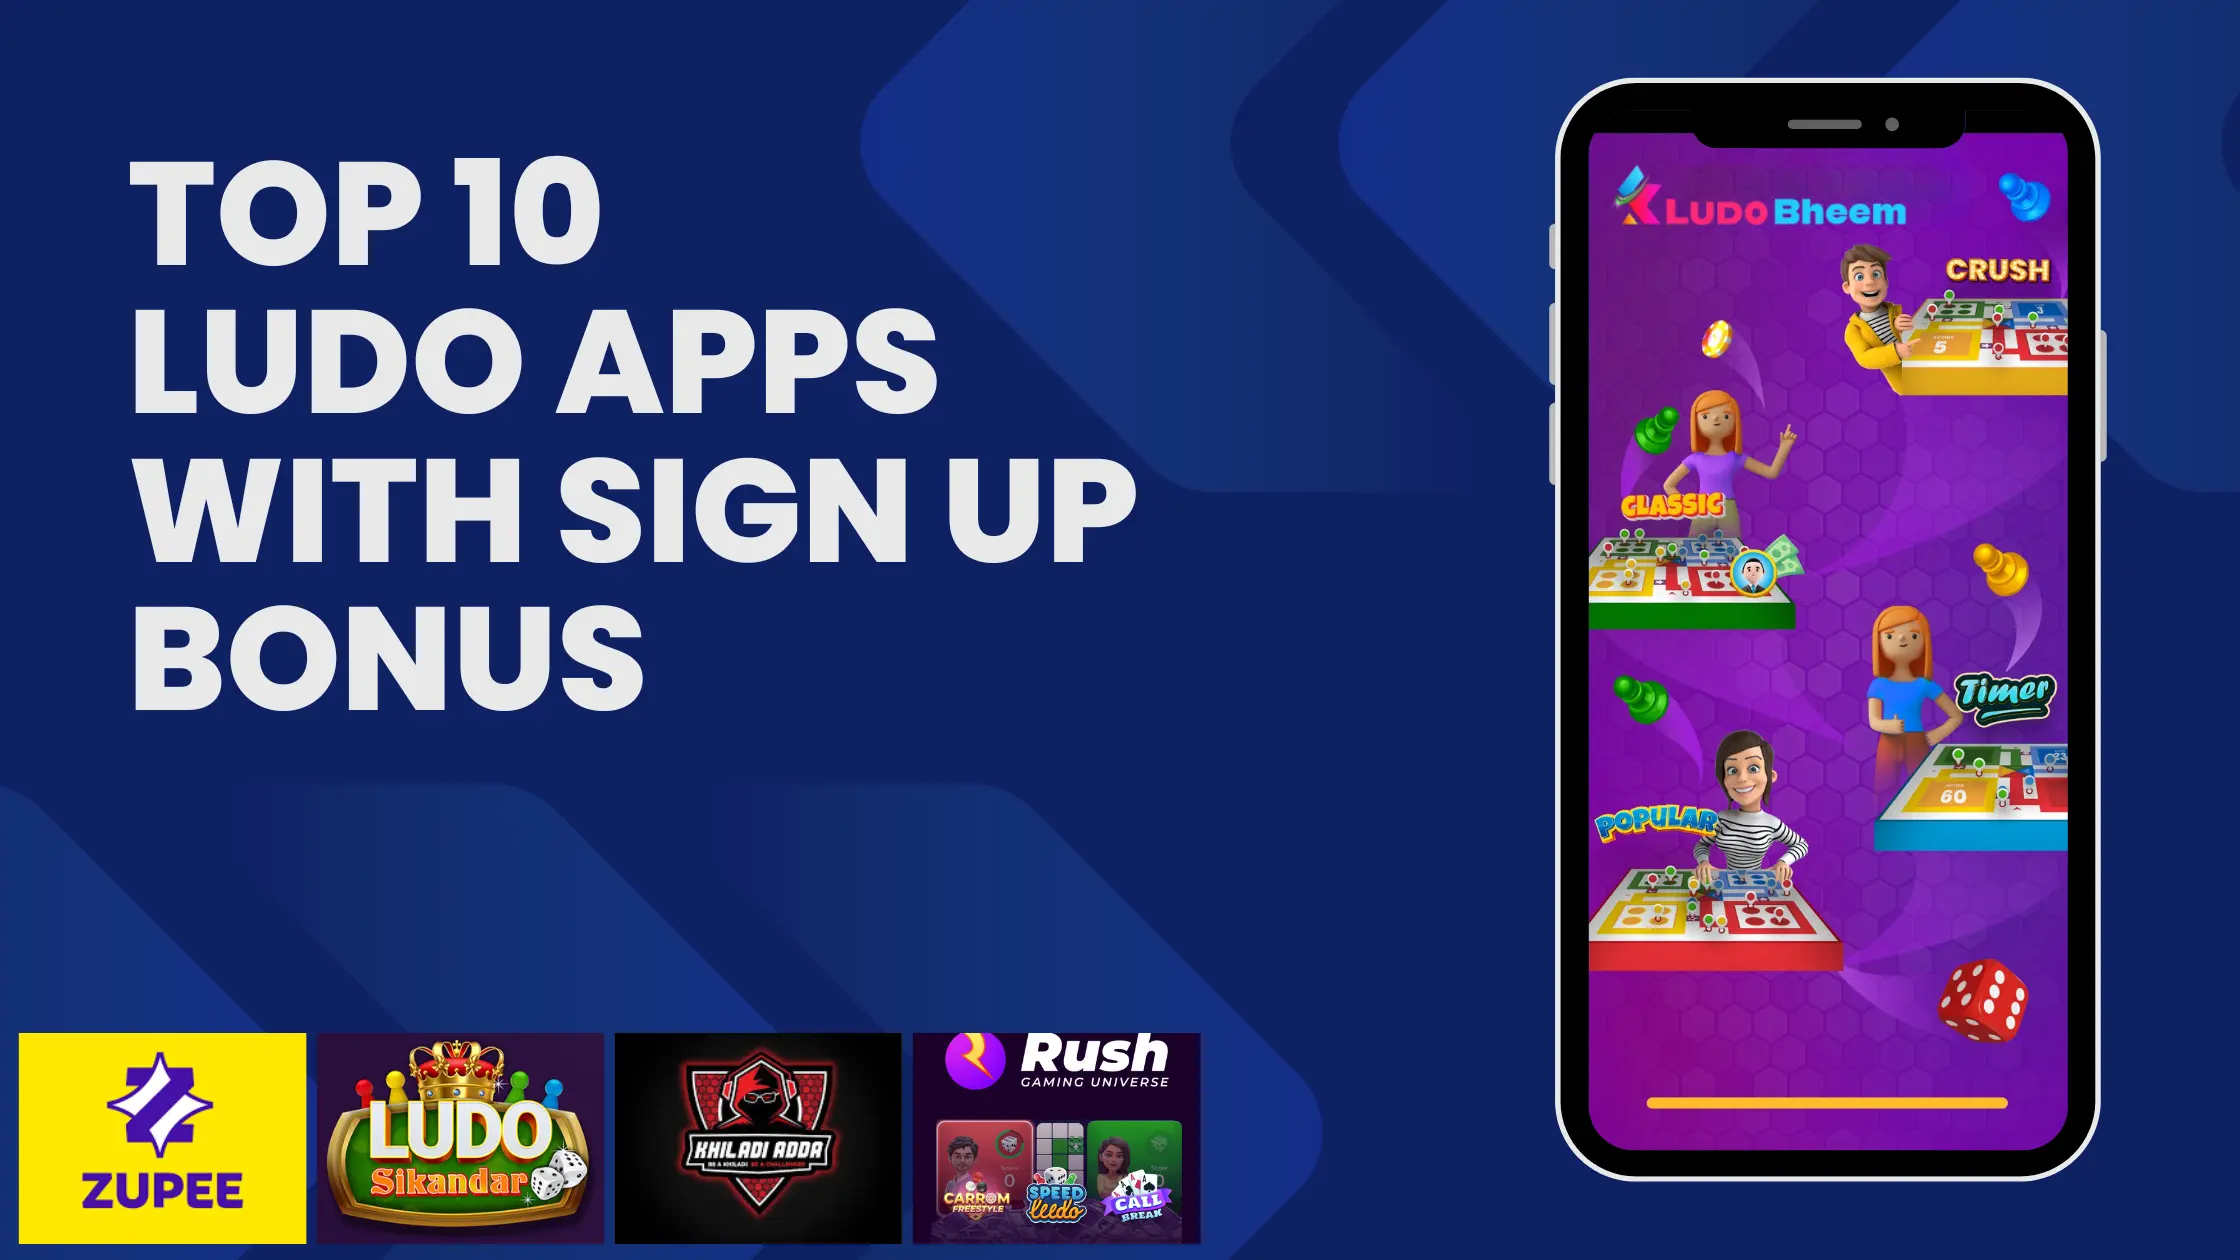 Top 10 Ludo Apps to Ludo sign up 20 rupees